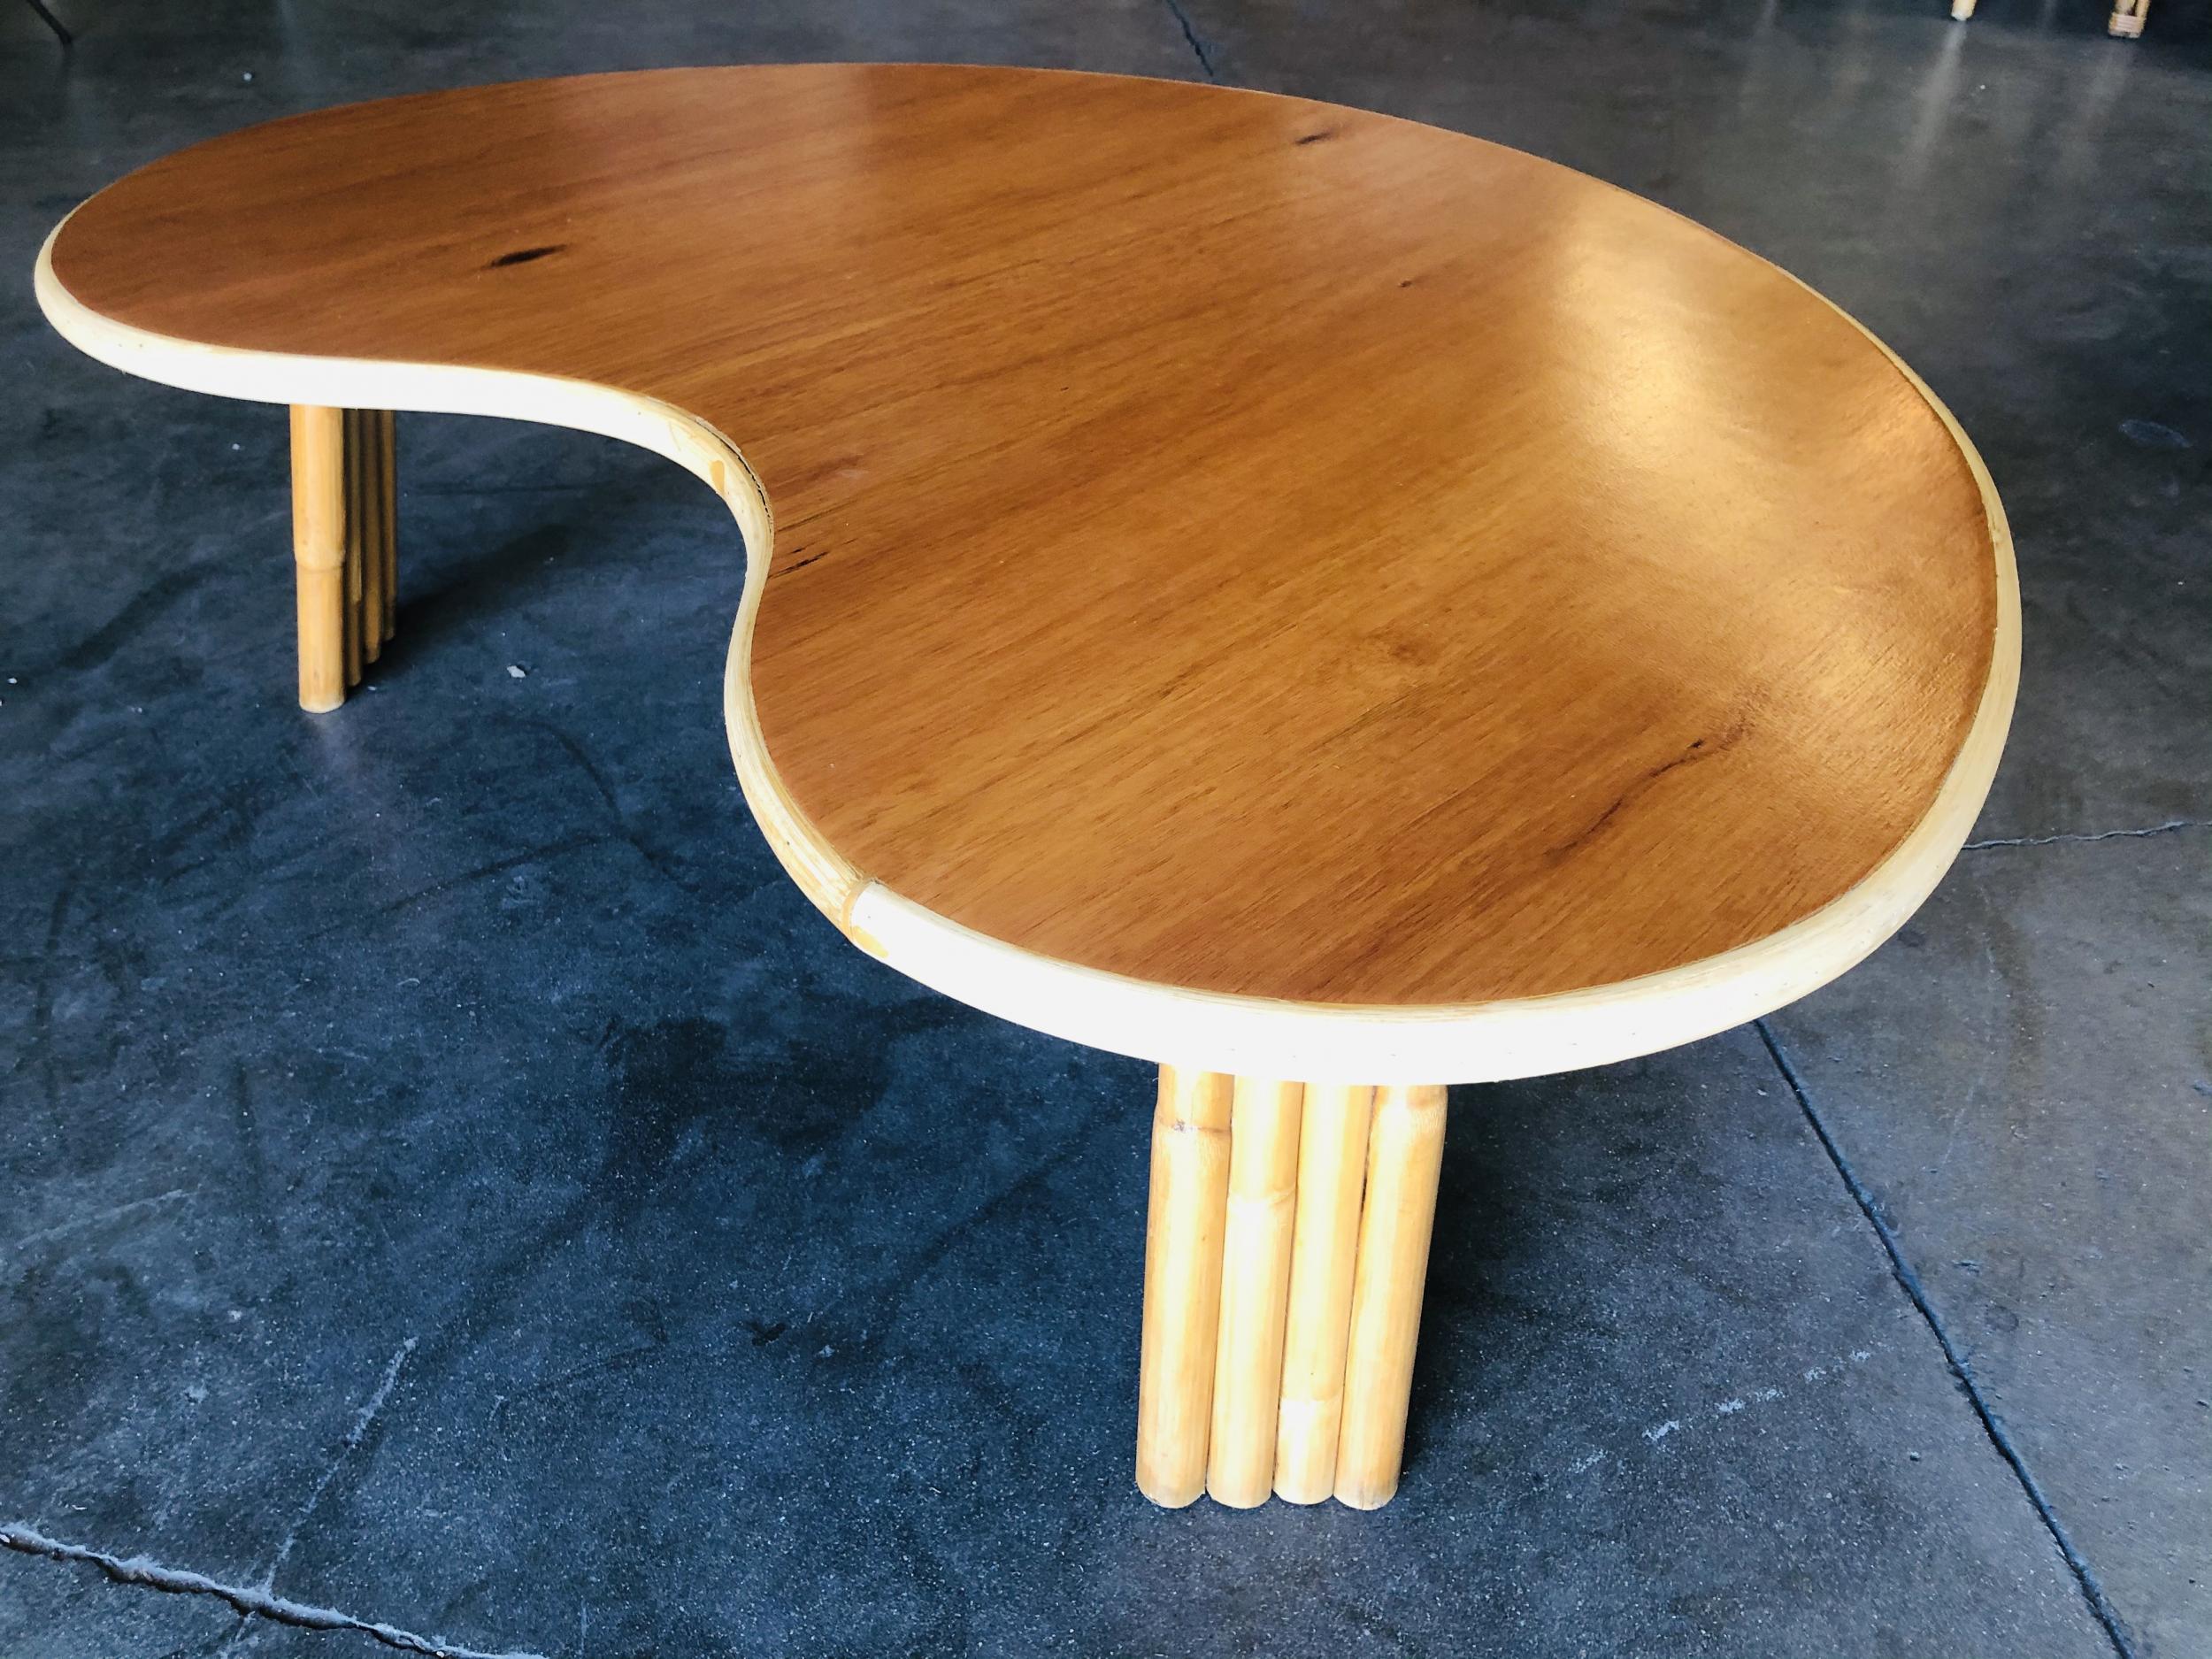 Biomorphic coffee table with vertically stacked rattan legs and a mahogany wood top with a rattan trim along the borders. 

Restored to new for you.

All rattan, bamboo and wicker furniture has been painstakingly refurbished to the highest standards